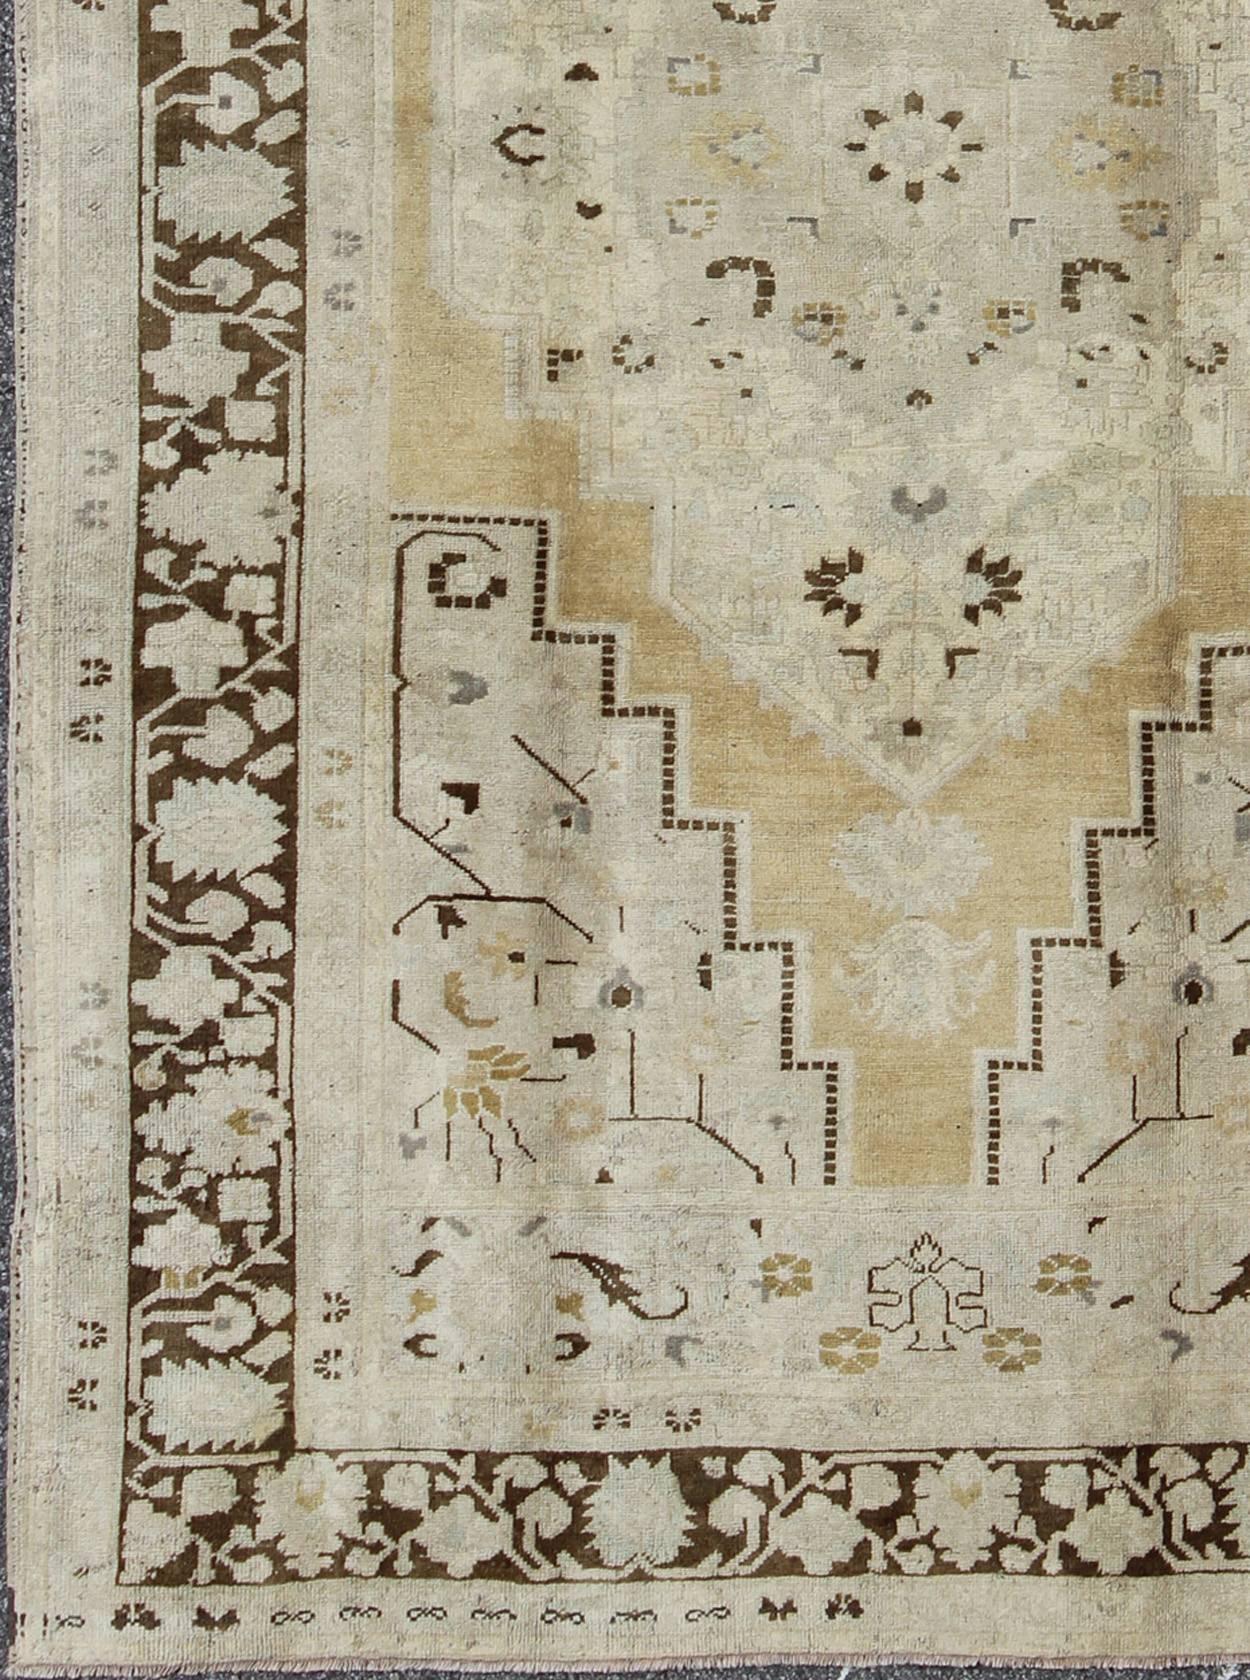 Turkish Oushak Rug in Pale Yellow, Taupe and Brown Border.
This softly muted Oushak carpet rests beautifully upon a field of elegant golden taupe. A large medallion takes center stage and is well balanced by four prominent organic corner motifs